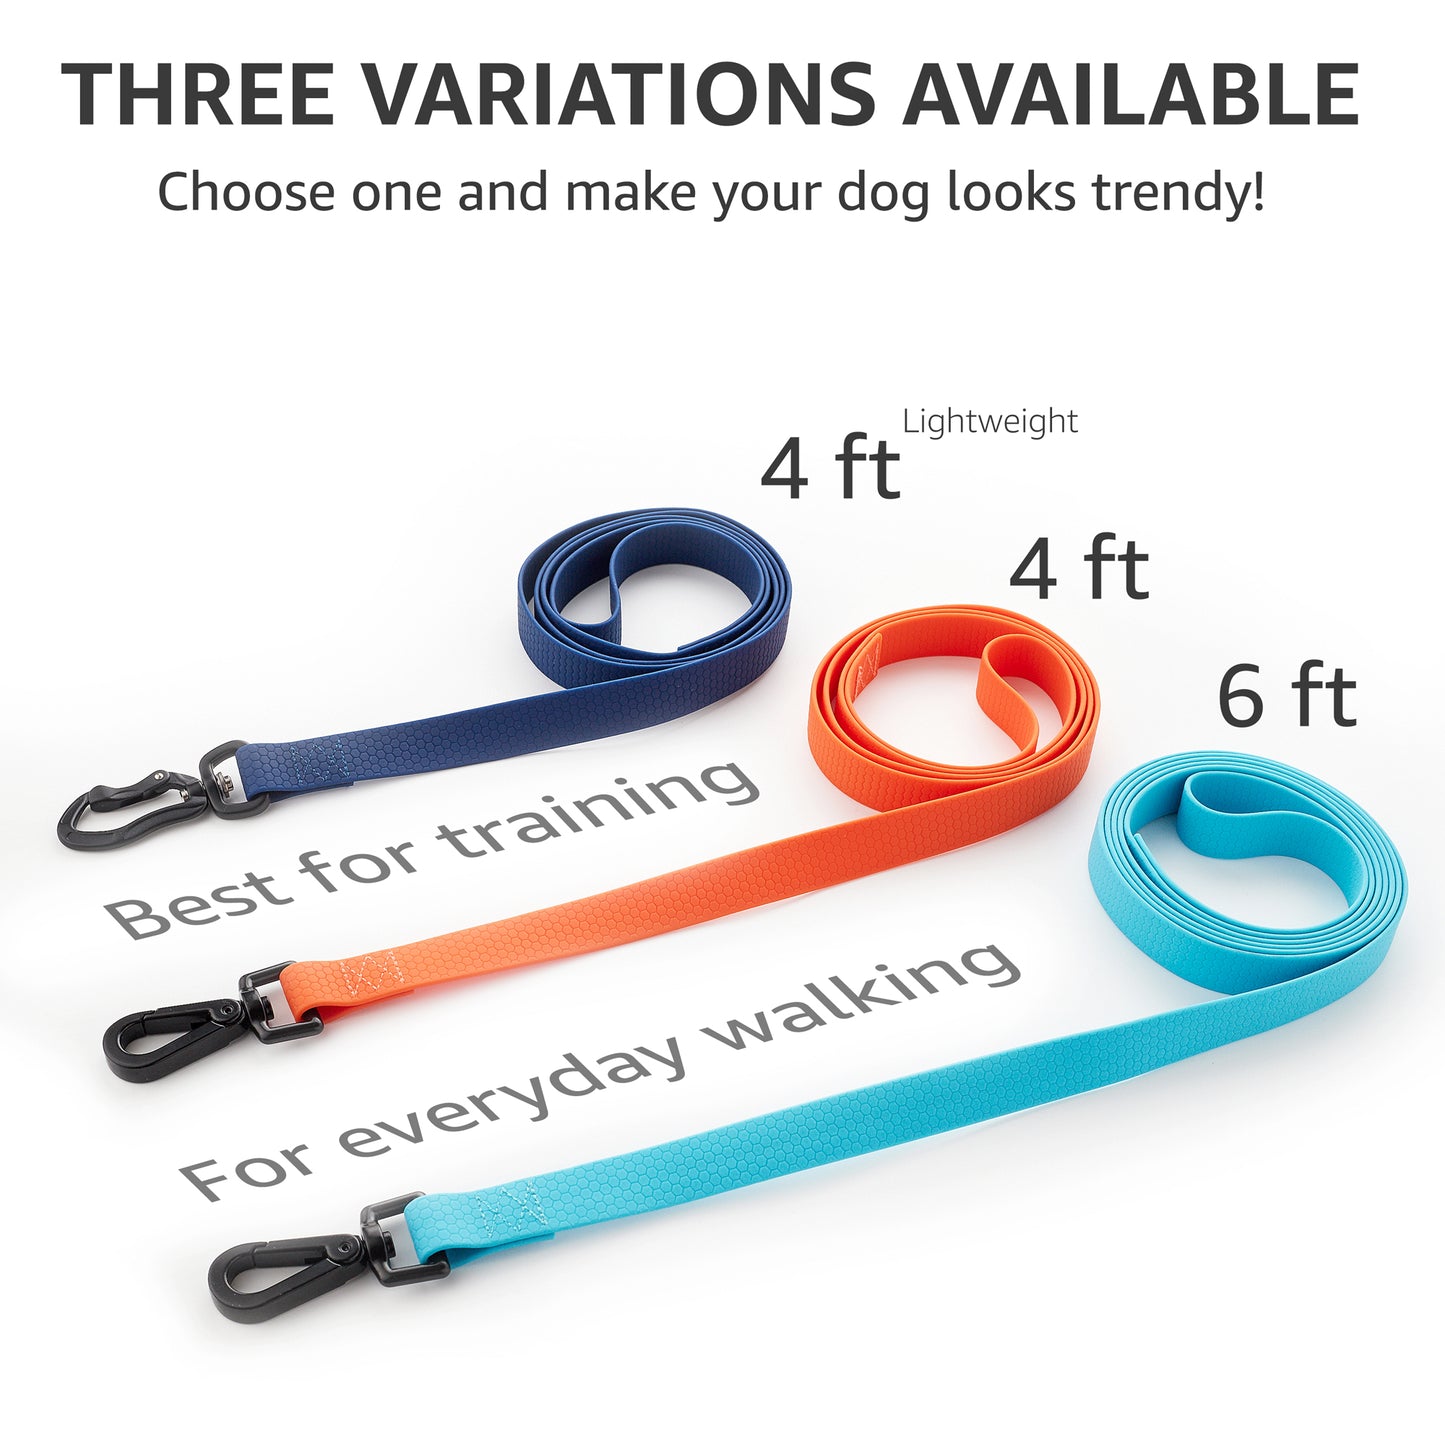 three size variations, choose one and make your dog looks trendly:4 ft lightweight, 4 ft, 6ft